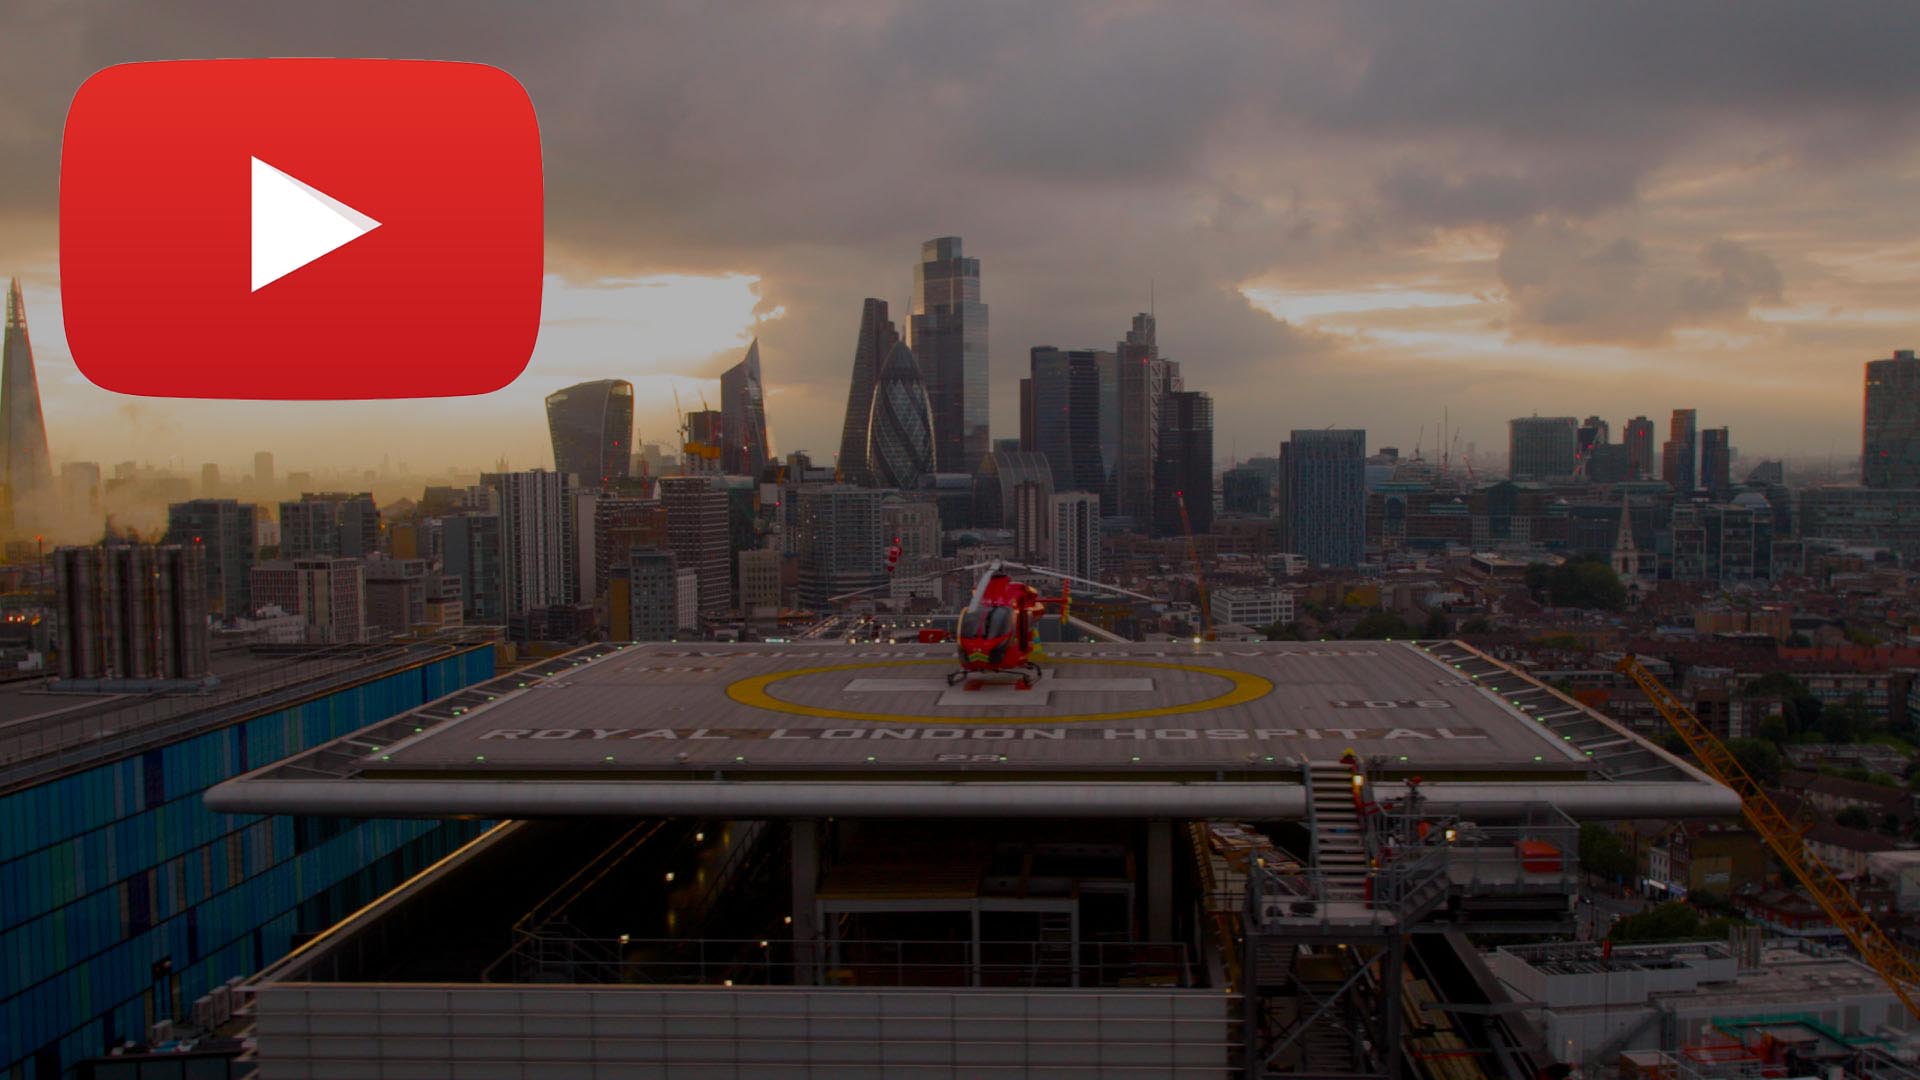 Altitude Aerial Photography Ltd's work on the channel four series Emergency